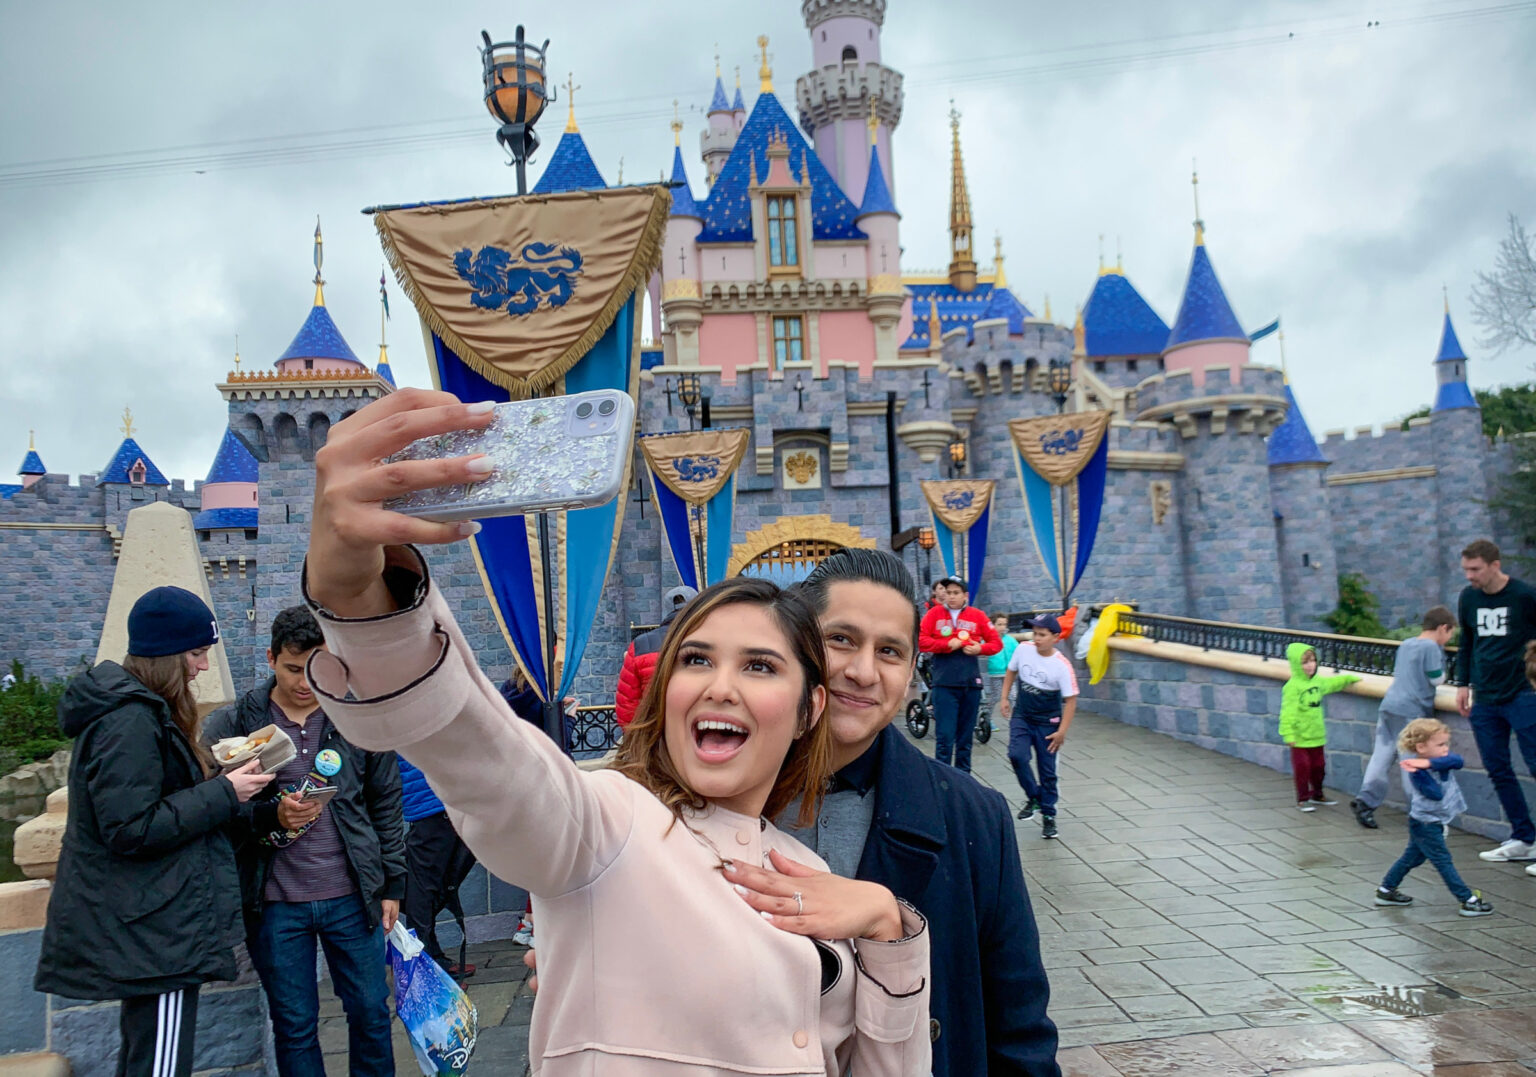 Just in: Disneyland annual pass programs are in the past. Discover if they'll make a comeback and if so, how they'll likely return.